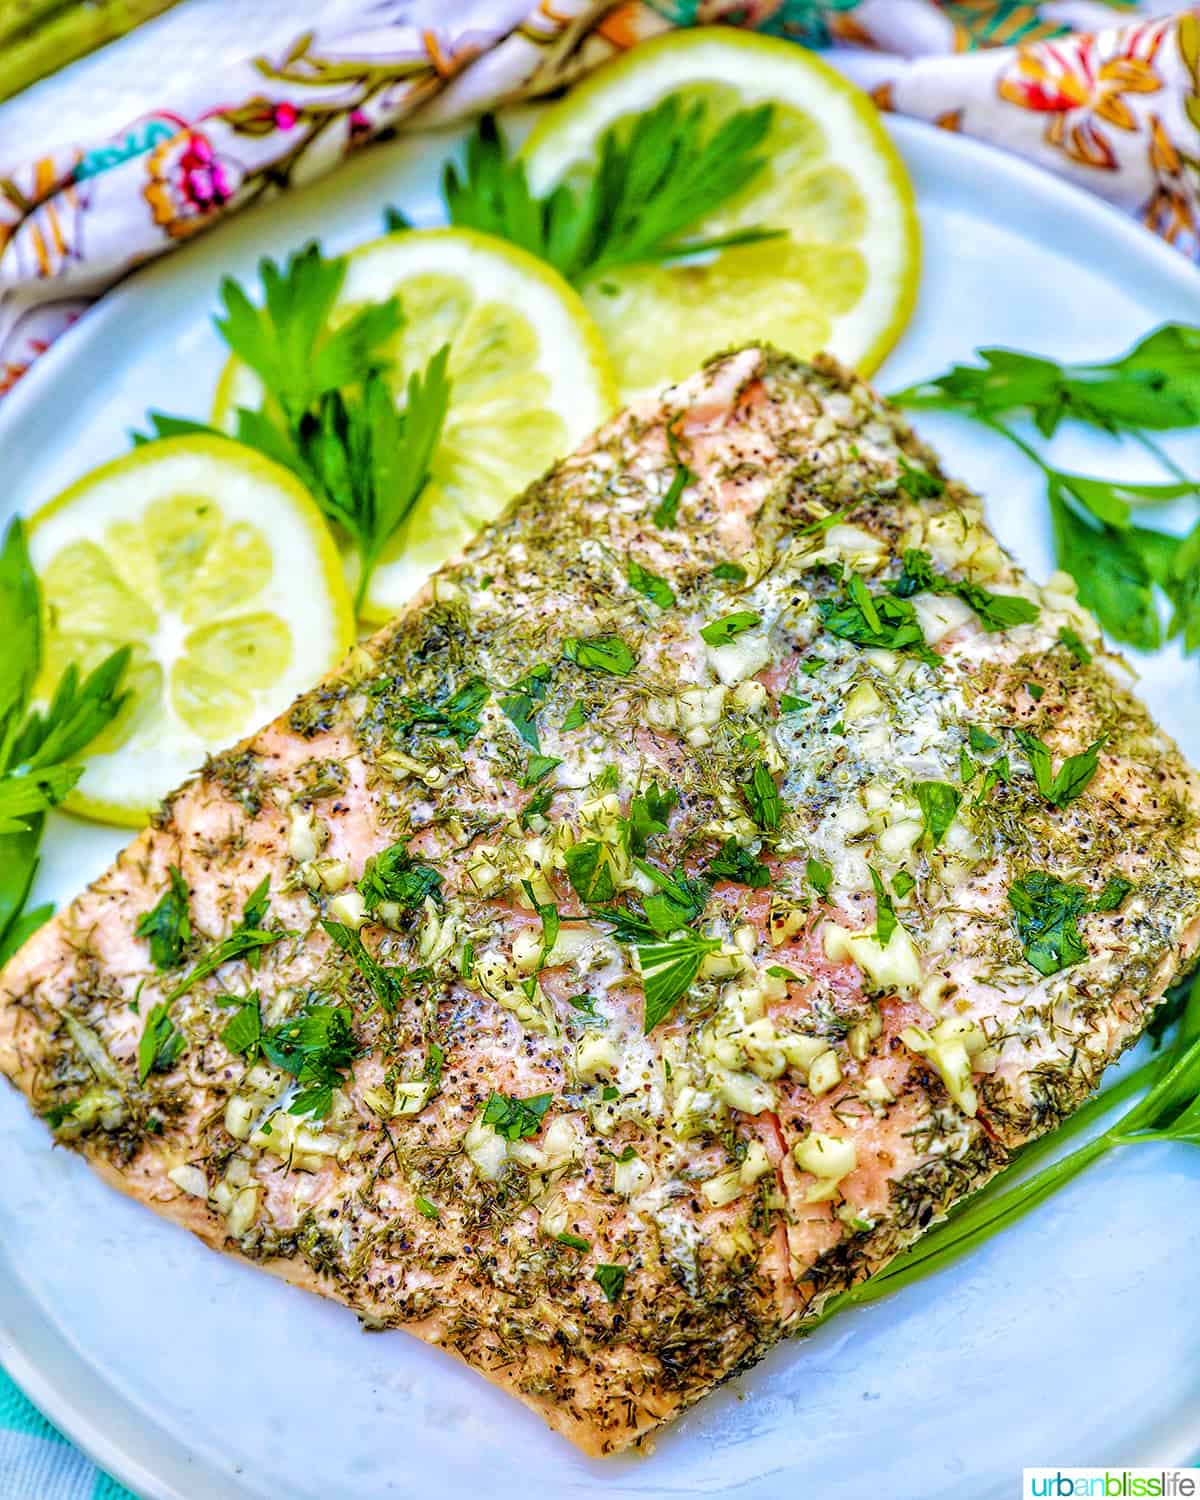 grilled salmon with lemon, garlic, and herbs, with lemon slices on a white plate.